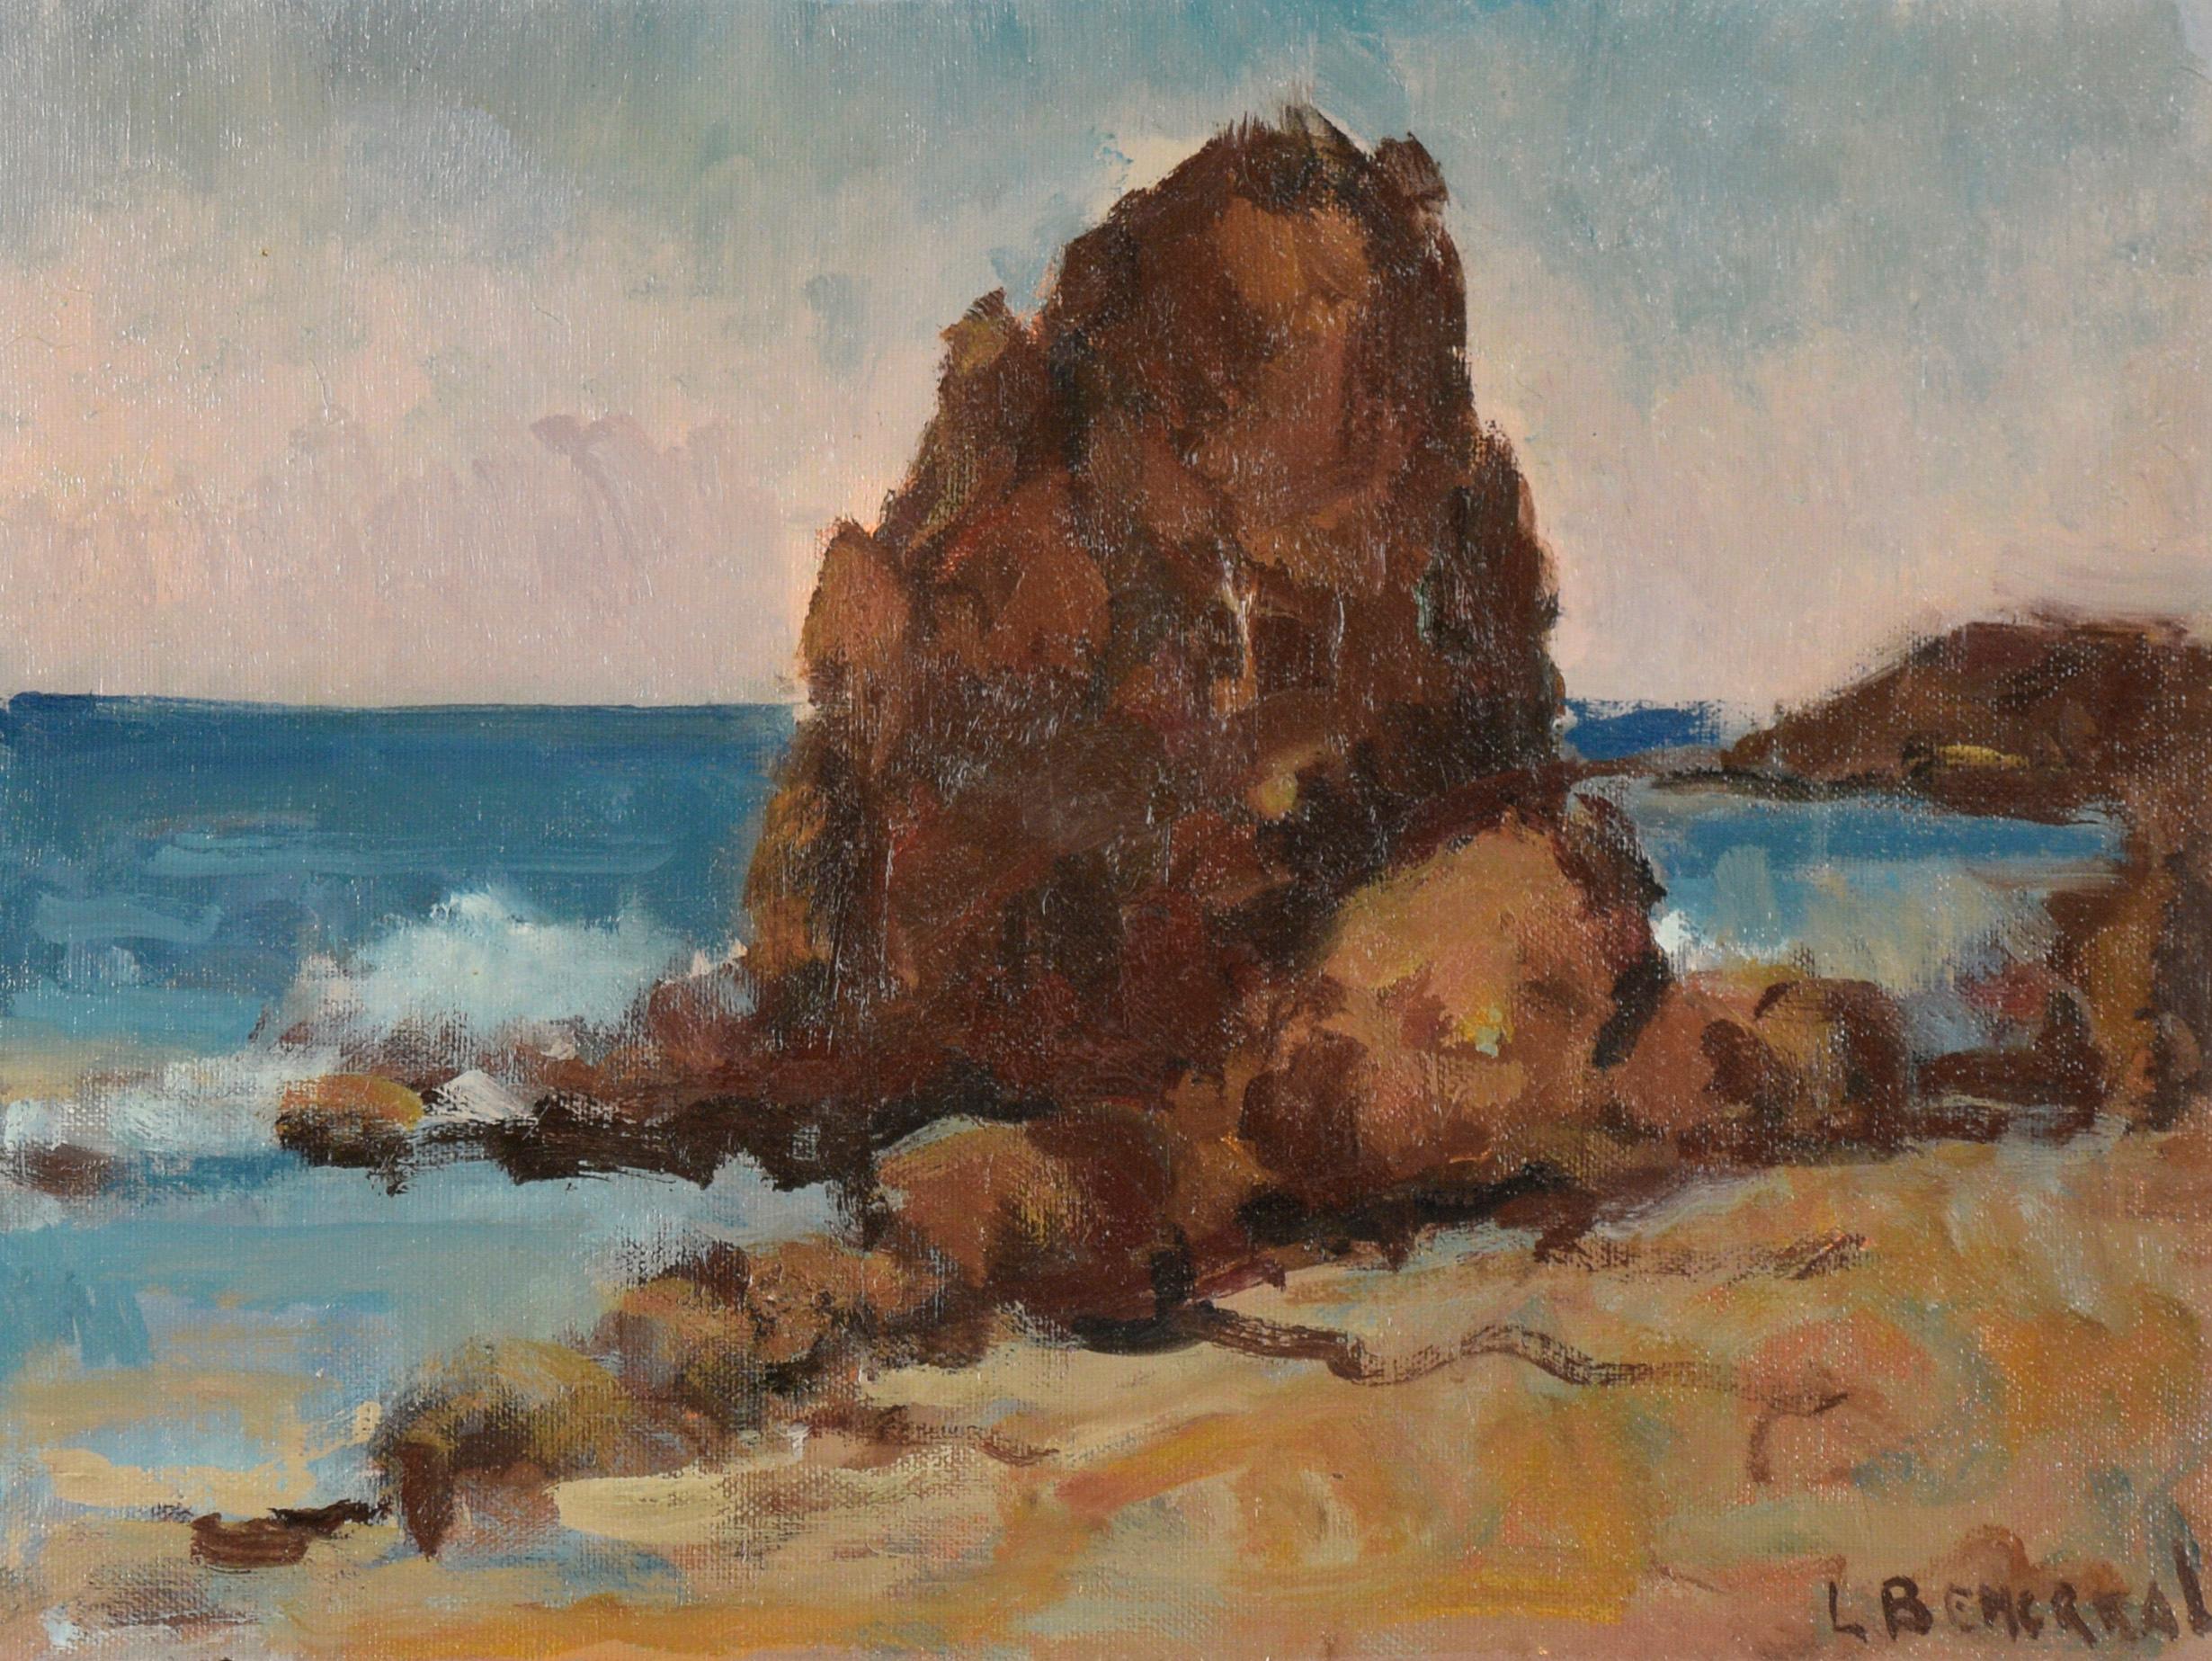 Rocks at Cannon Beach, Oregon - Seascape in Oil on Linen - Painting by Unknown